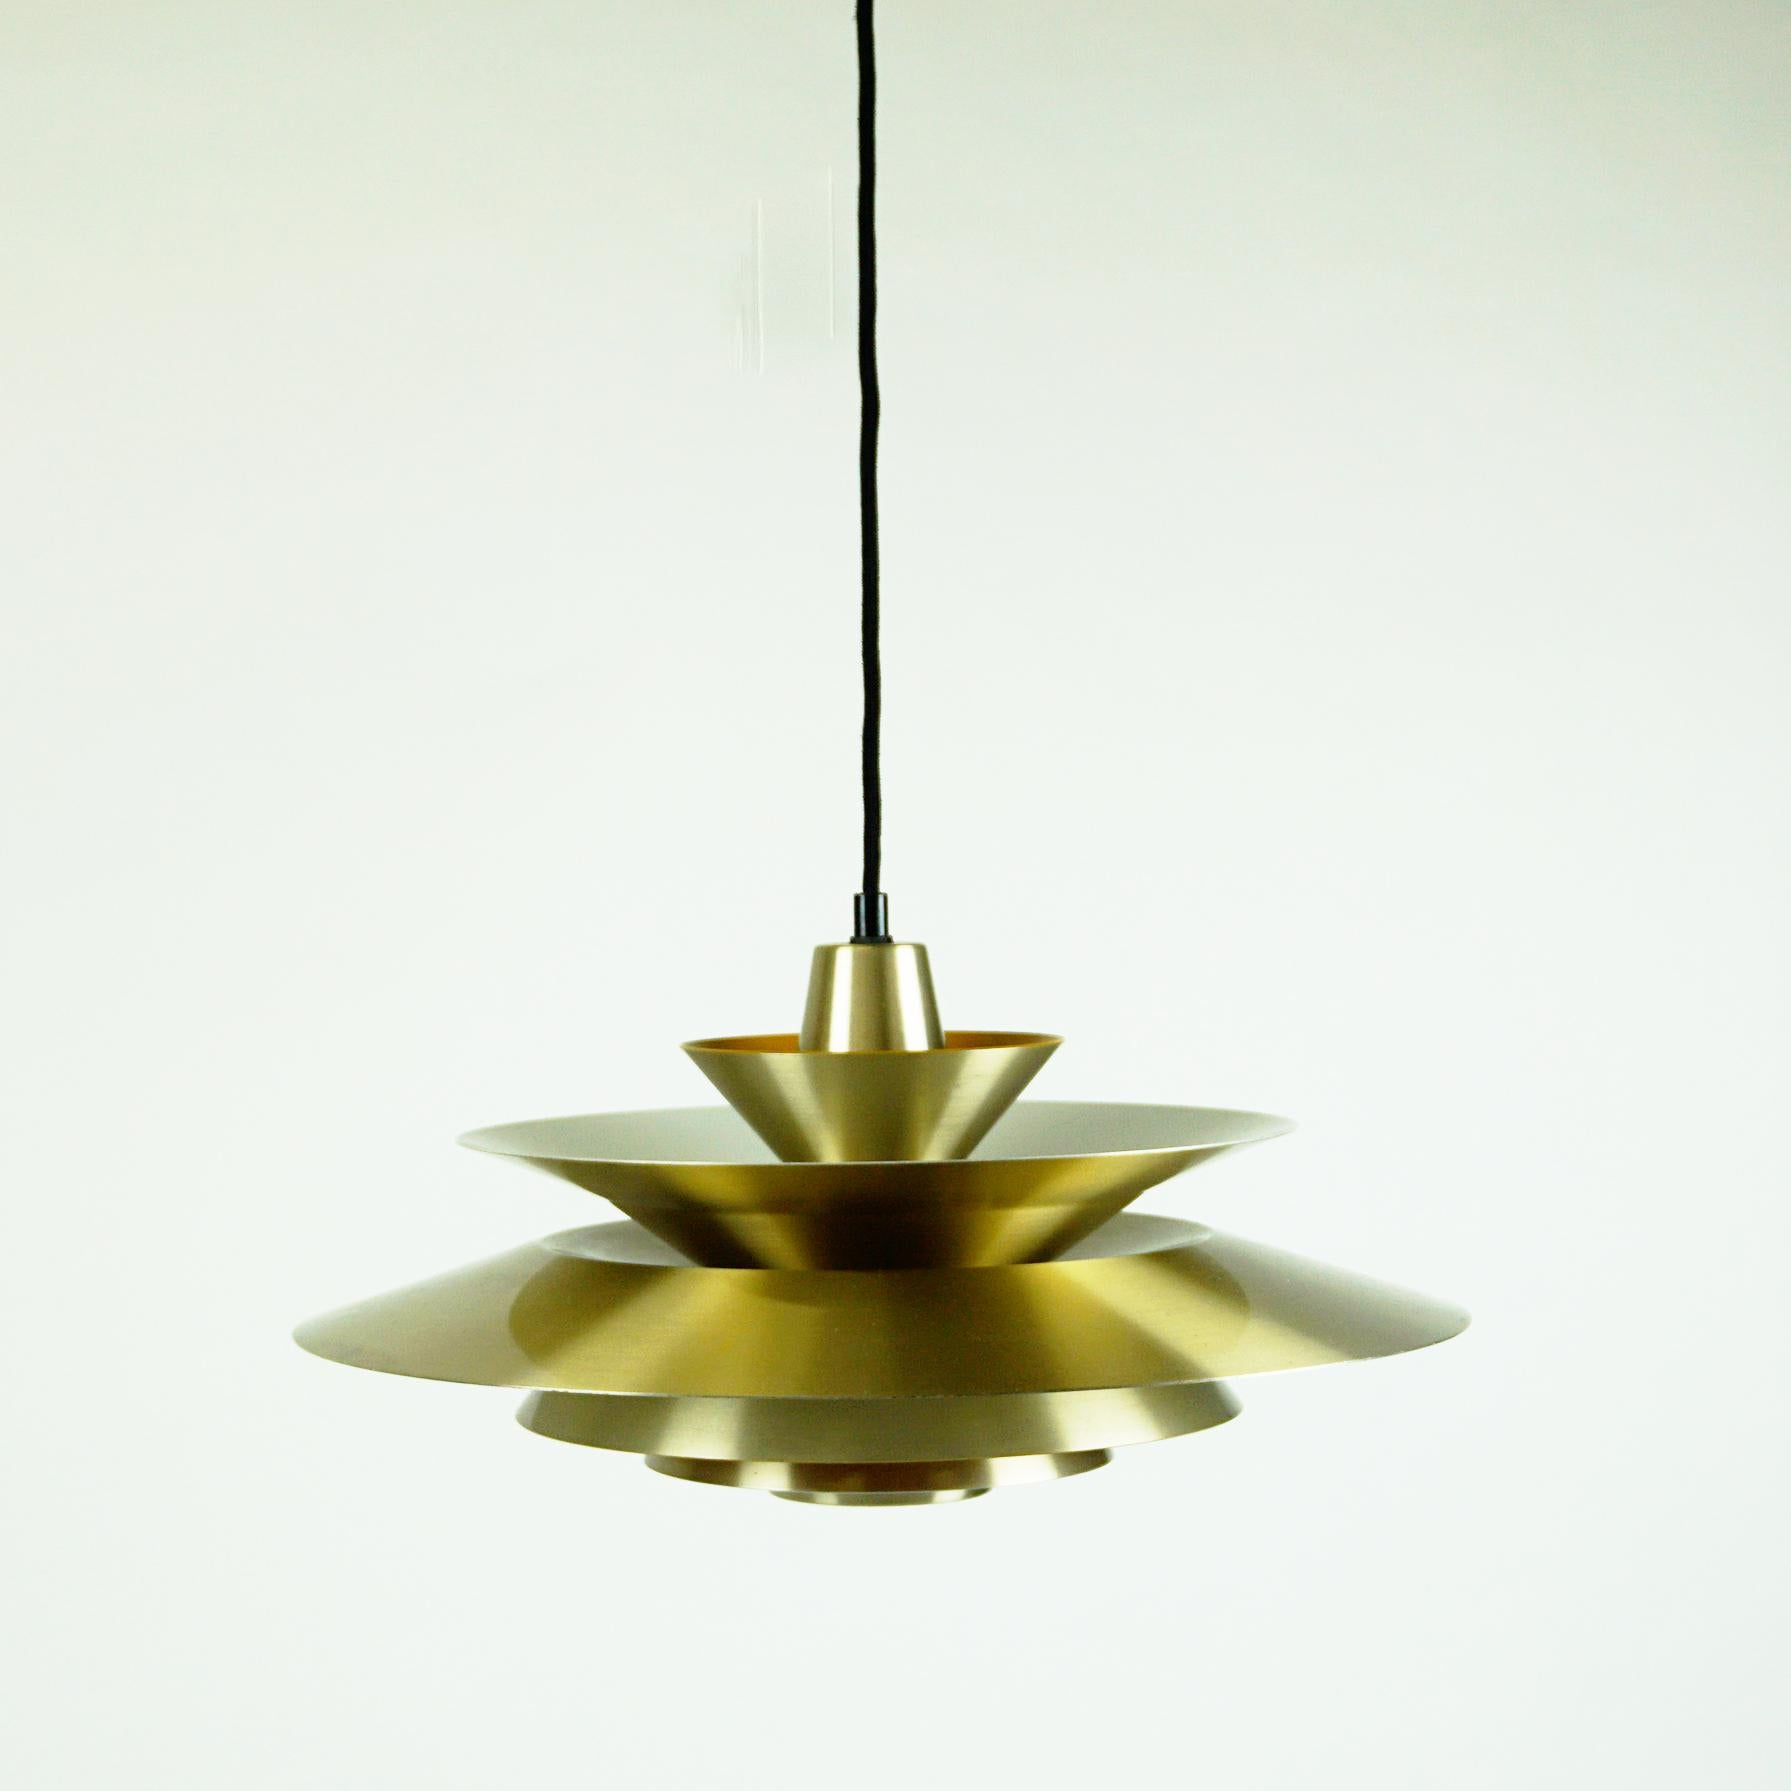 This charming brass pendant was designed in the 1960s in Denmark and its design is very close to lamps by Jo Hammerborg, main designer of Danish lighting manufacturer Fog & Mørup in the 1960s and 1970s. On the Inside it is lacquered yellow to create